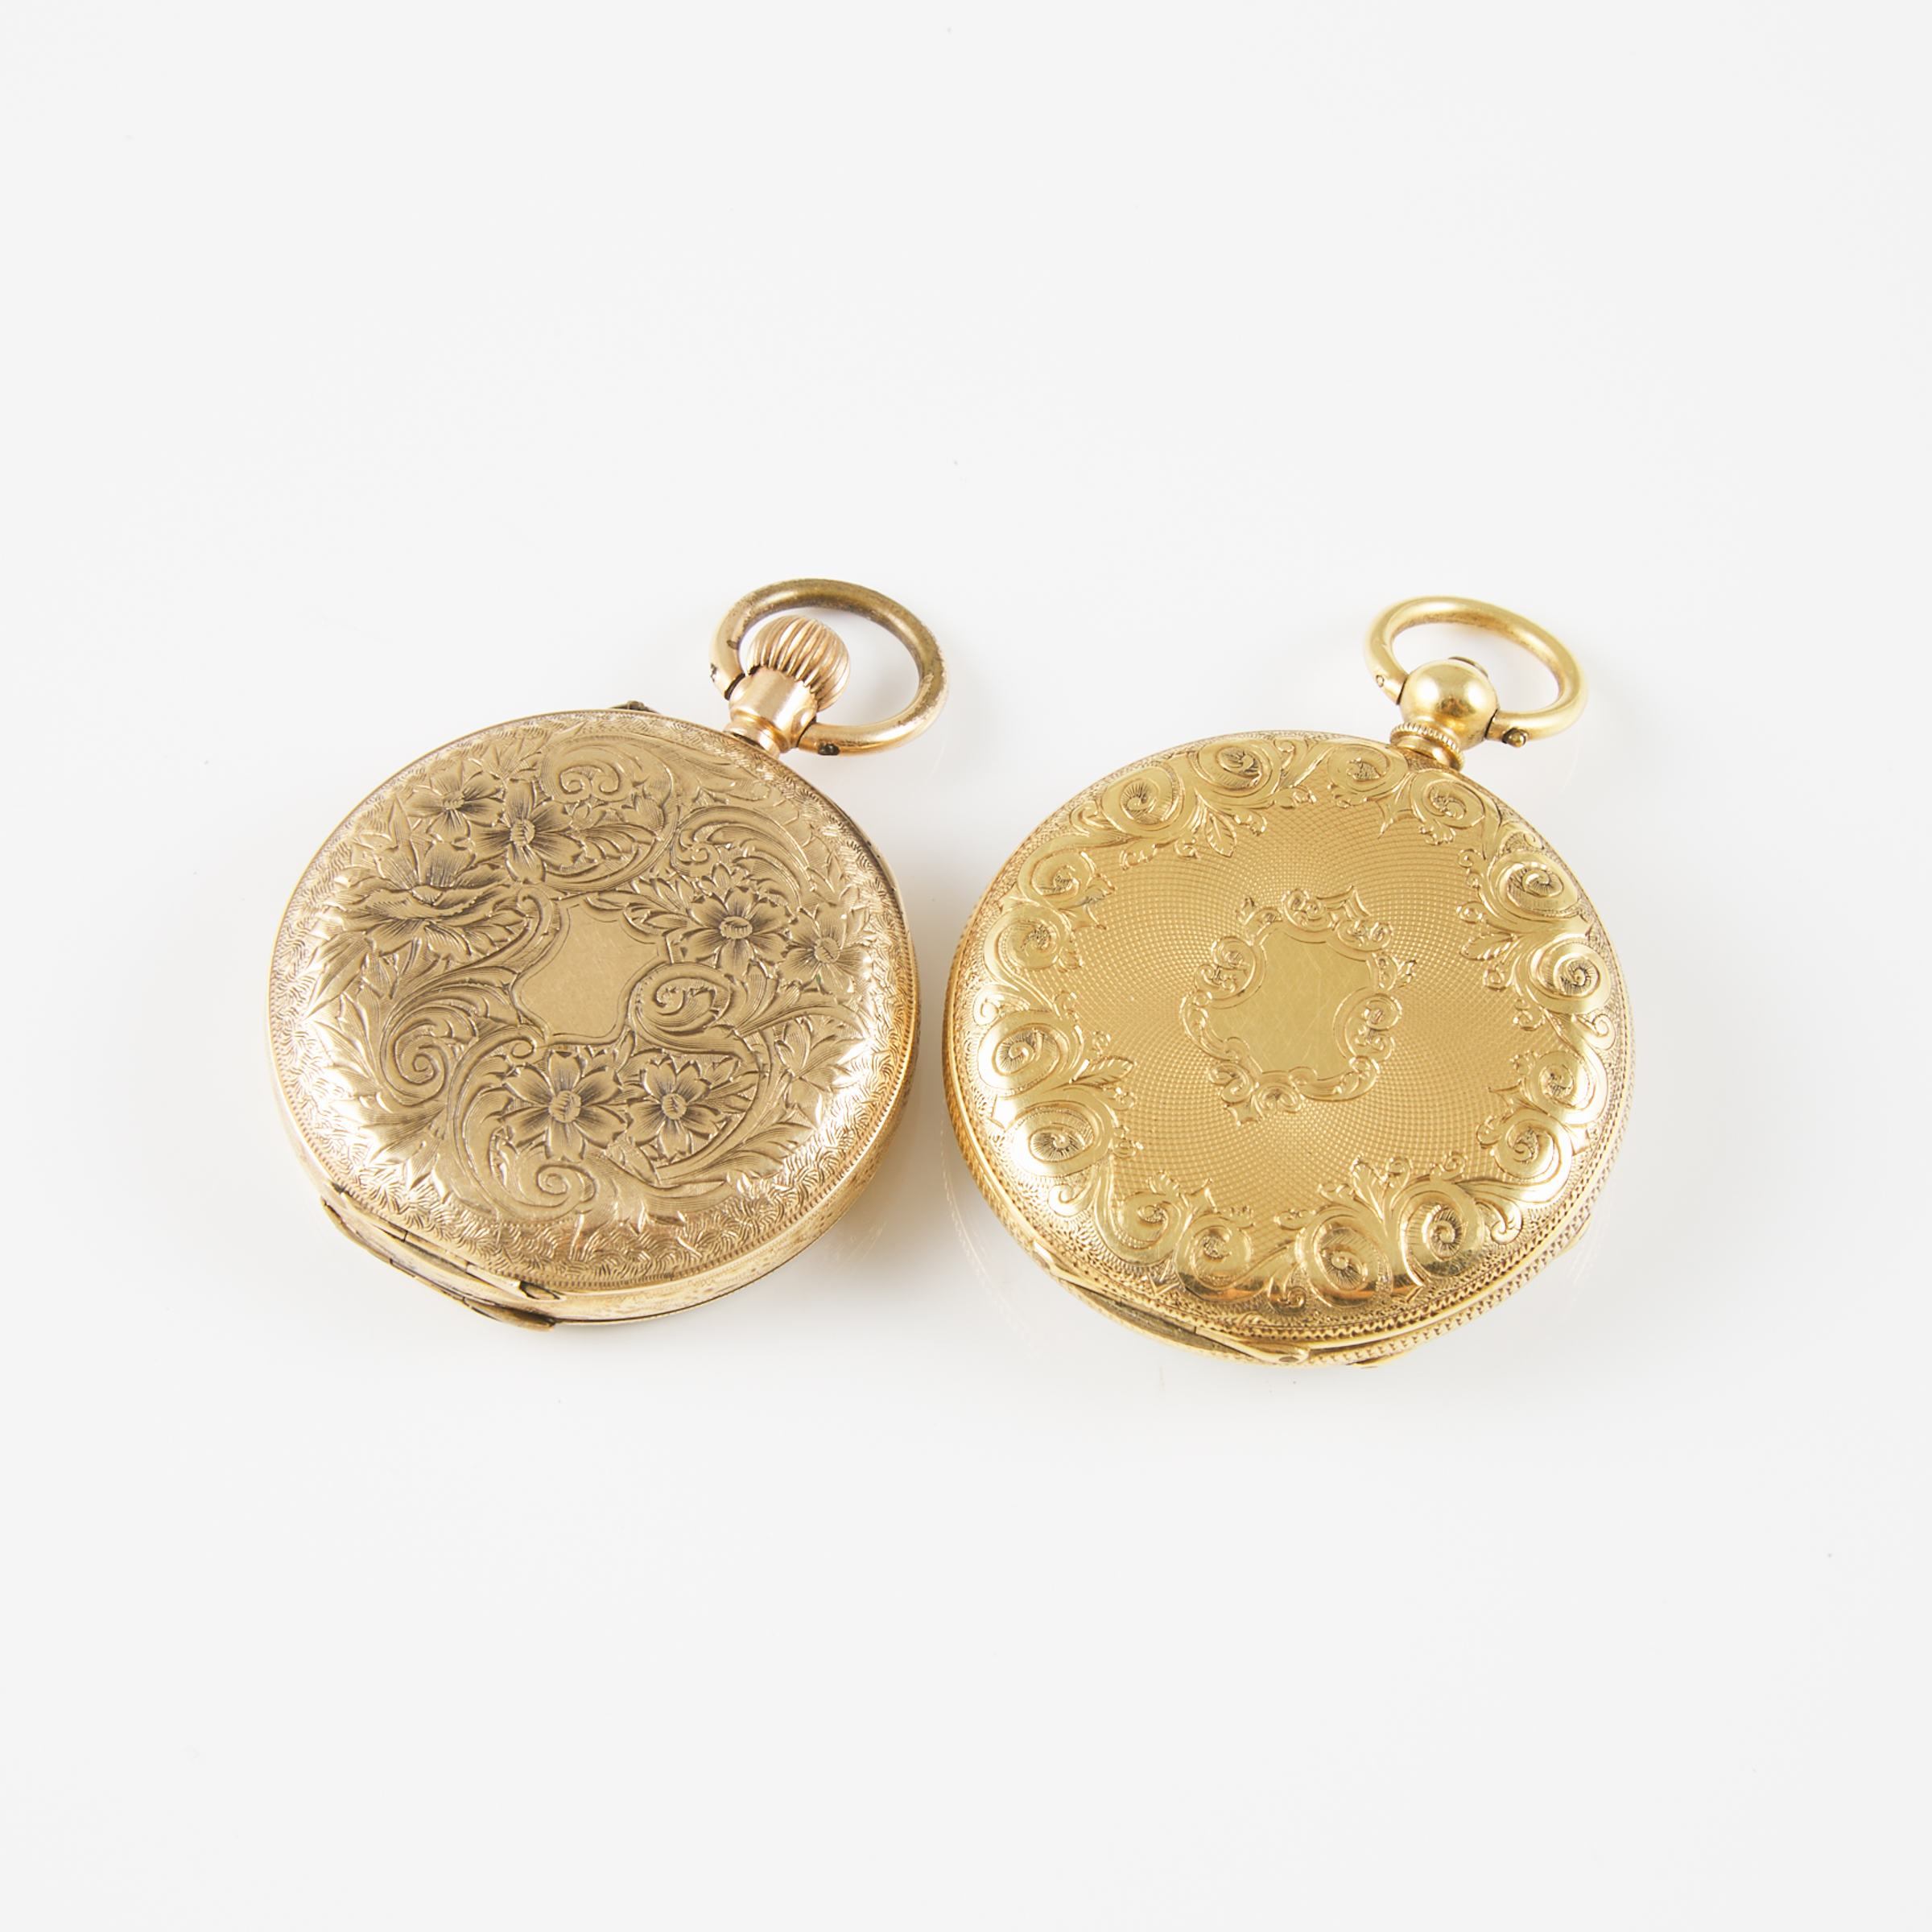 2 x Lady's 19th Century Key Wind, Openface Pocket Watches